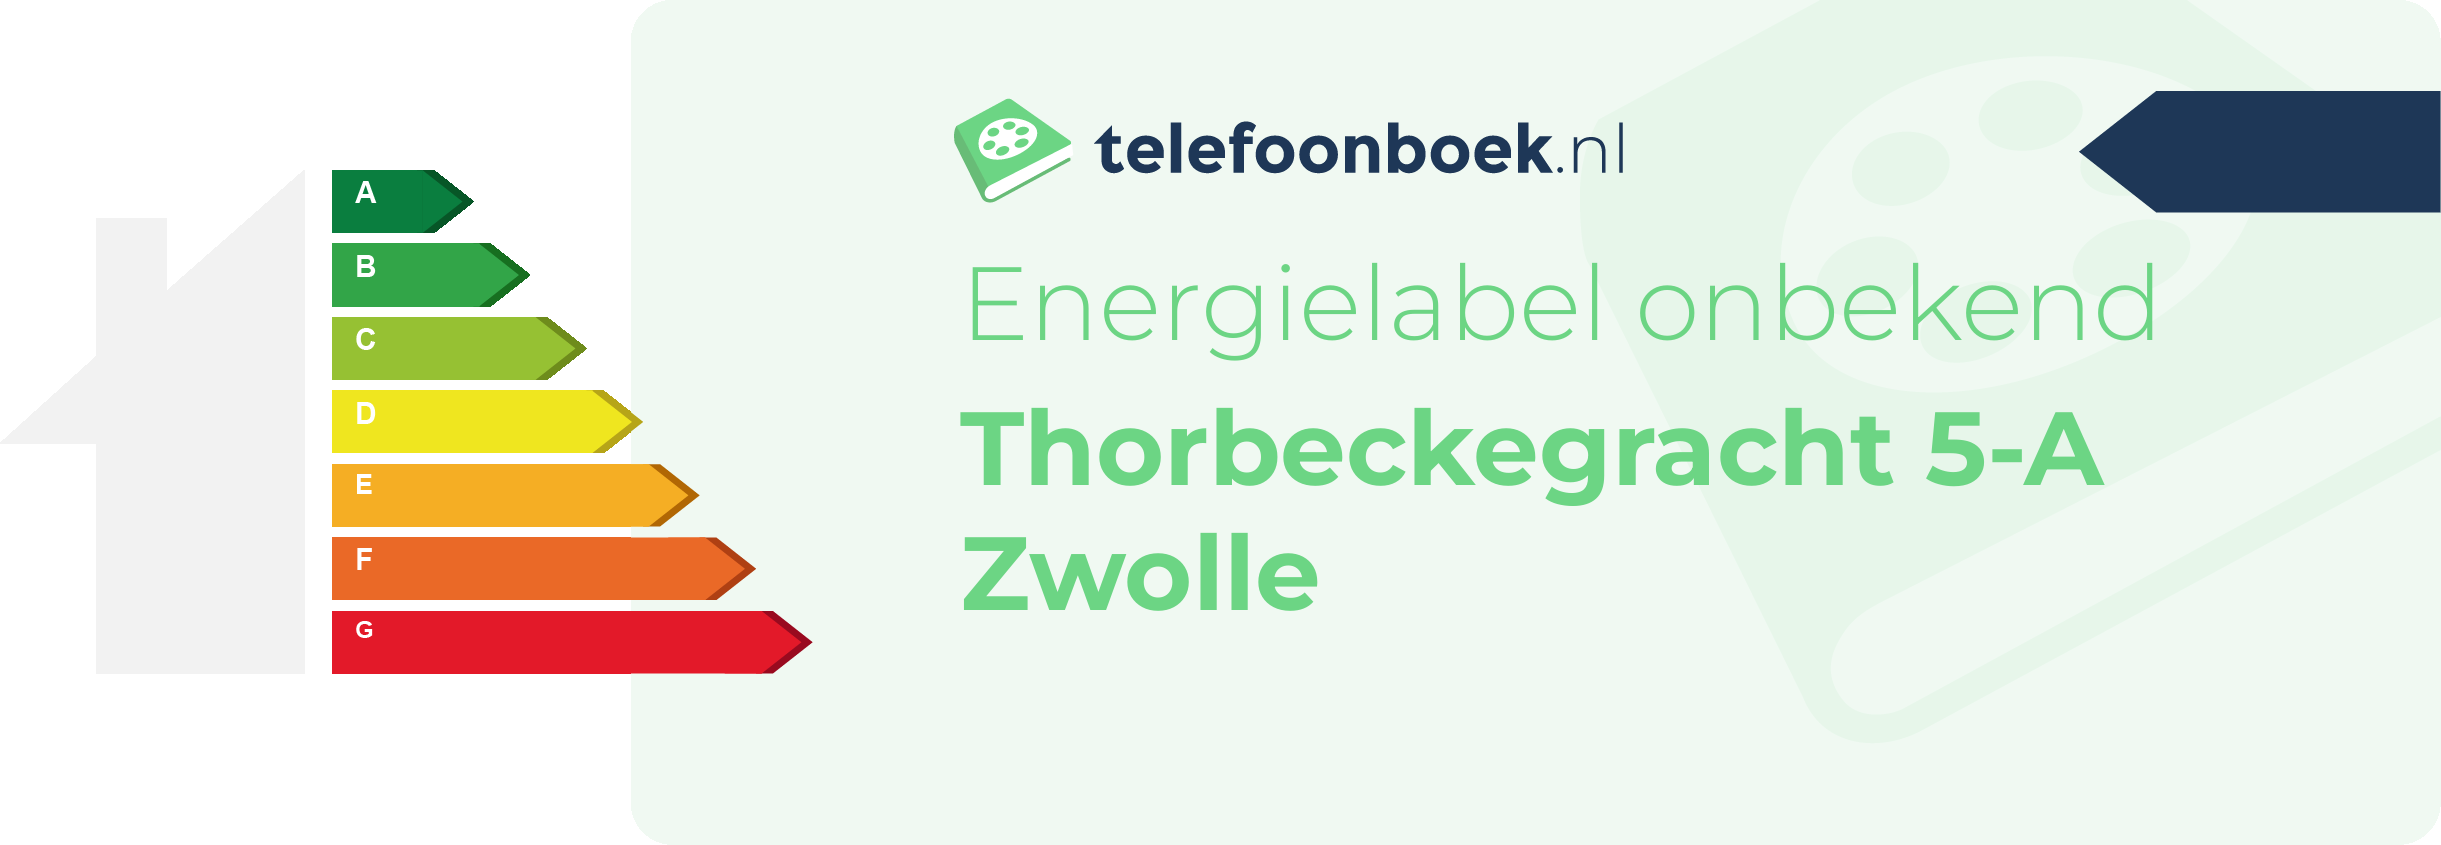 Energielabel Thorbeckegracht 5-A Zwolle